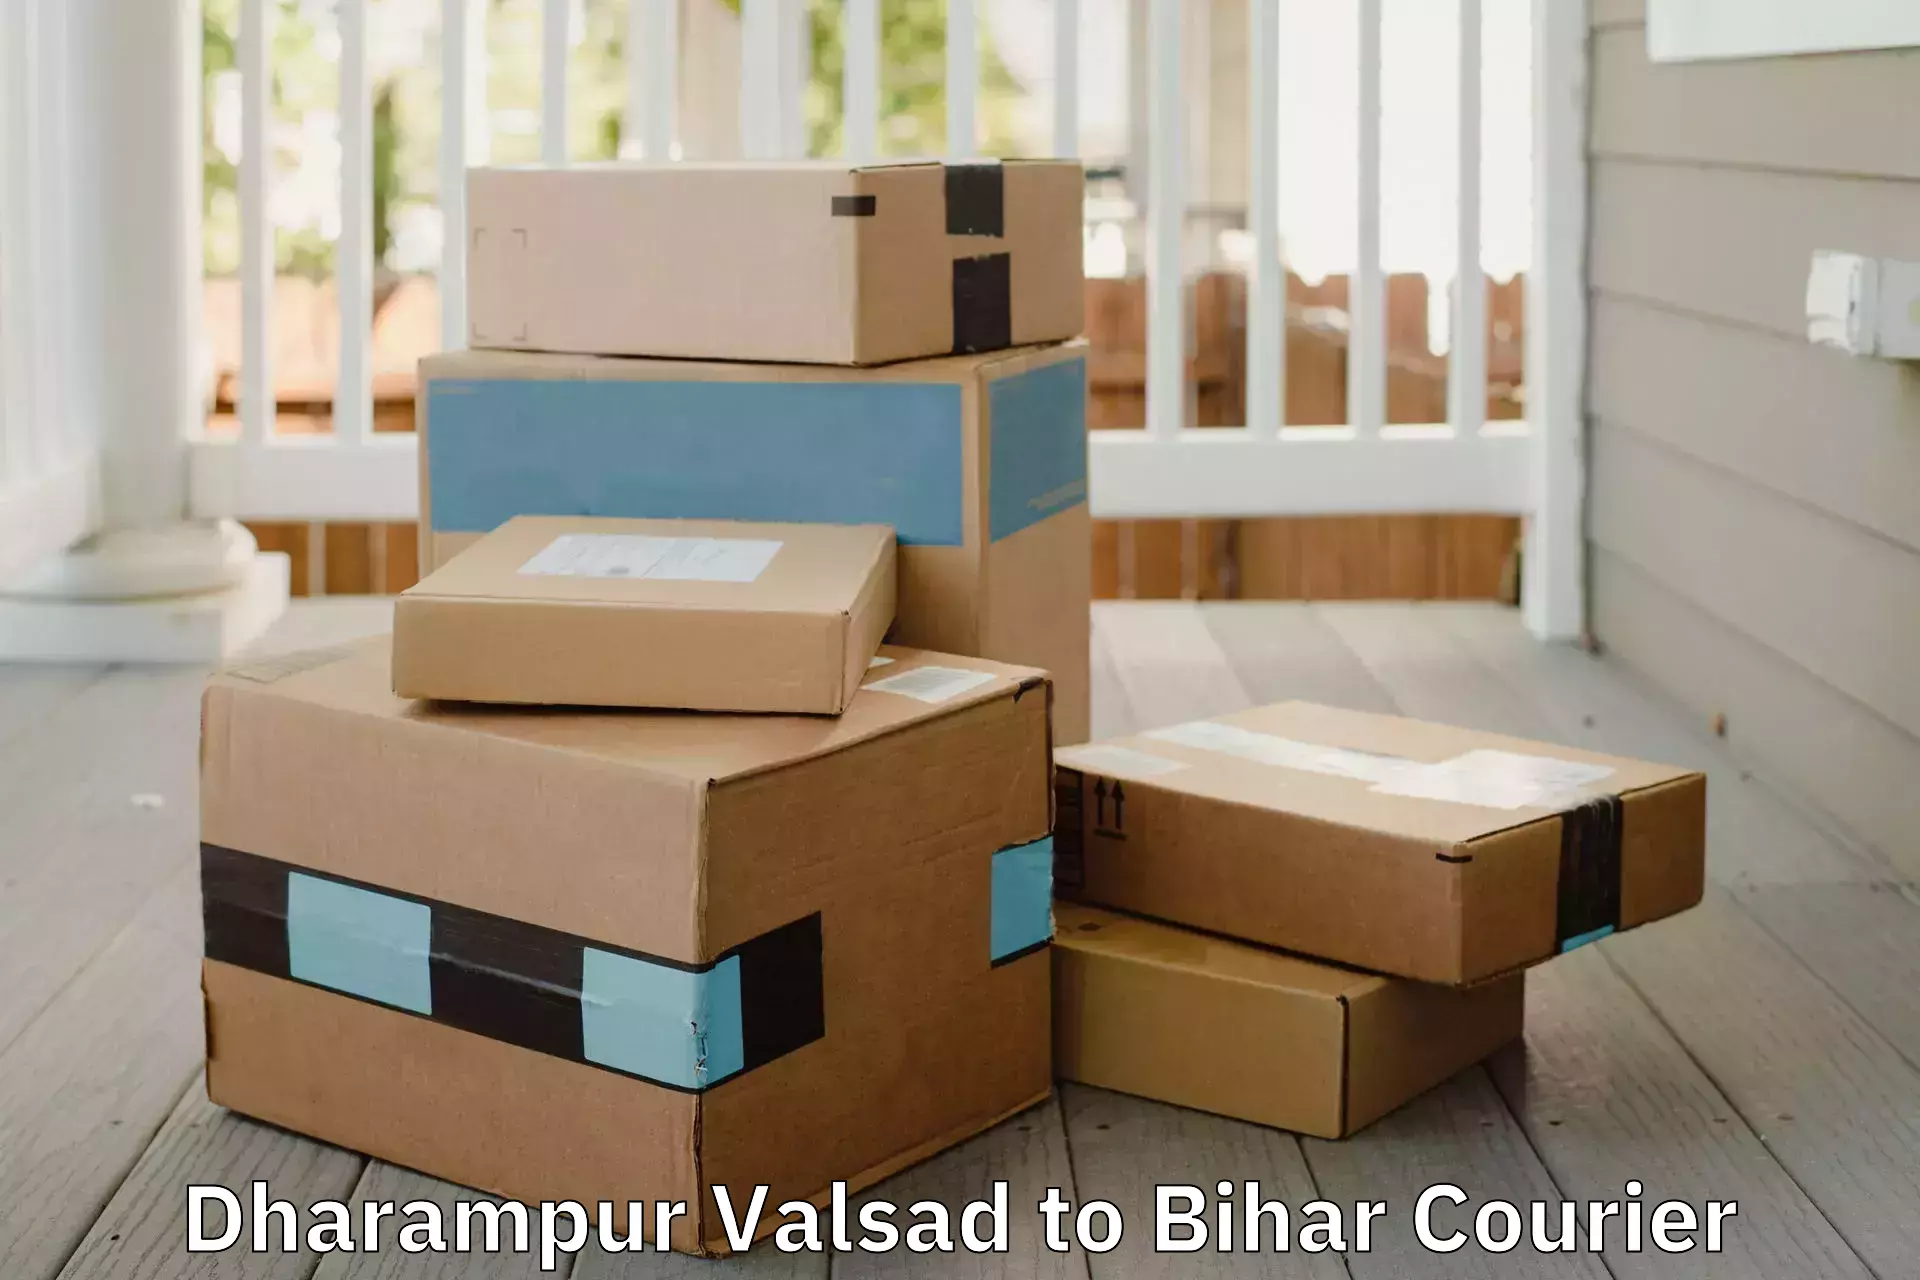 Professional packing and transport Dharampur Valsad to Hajipur